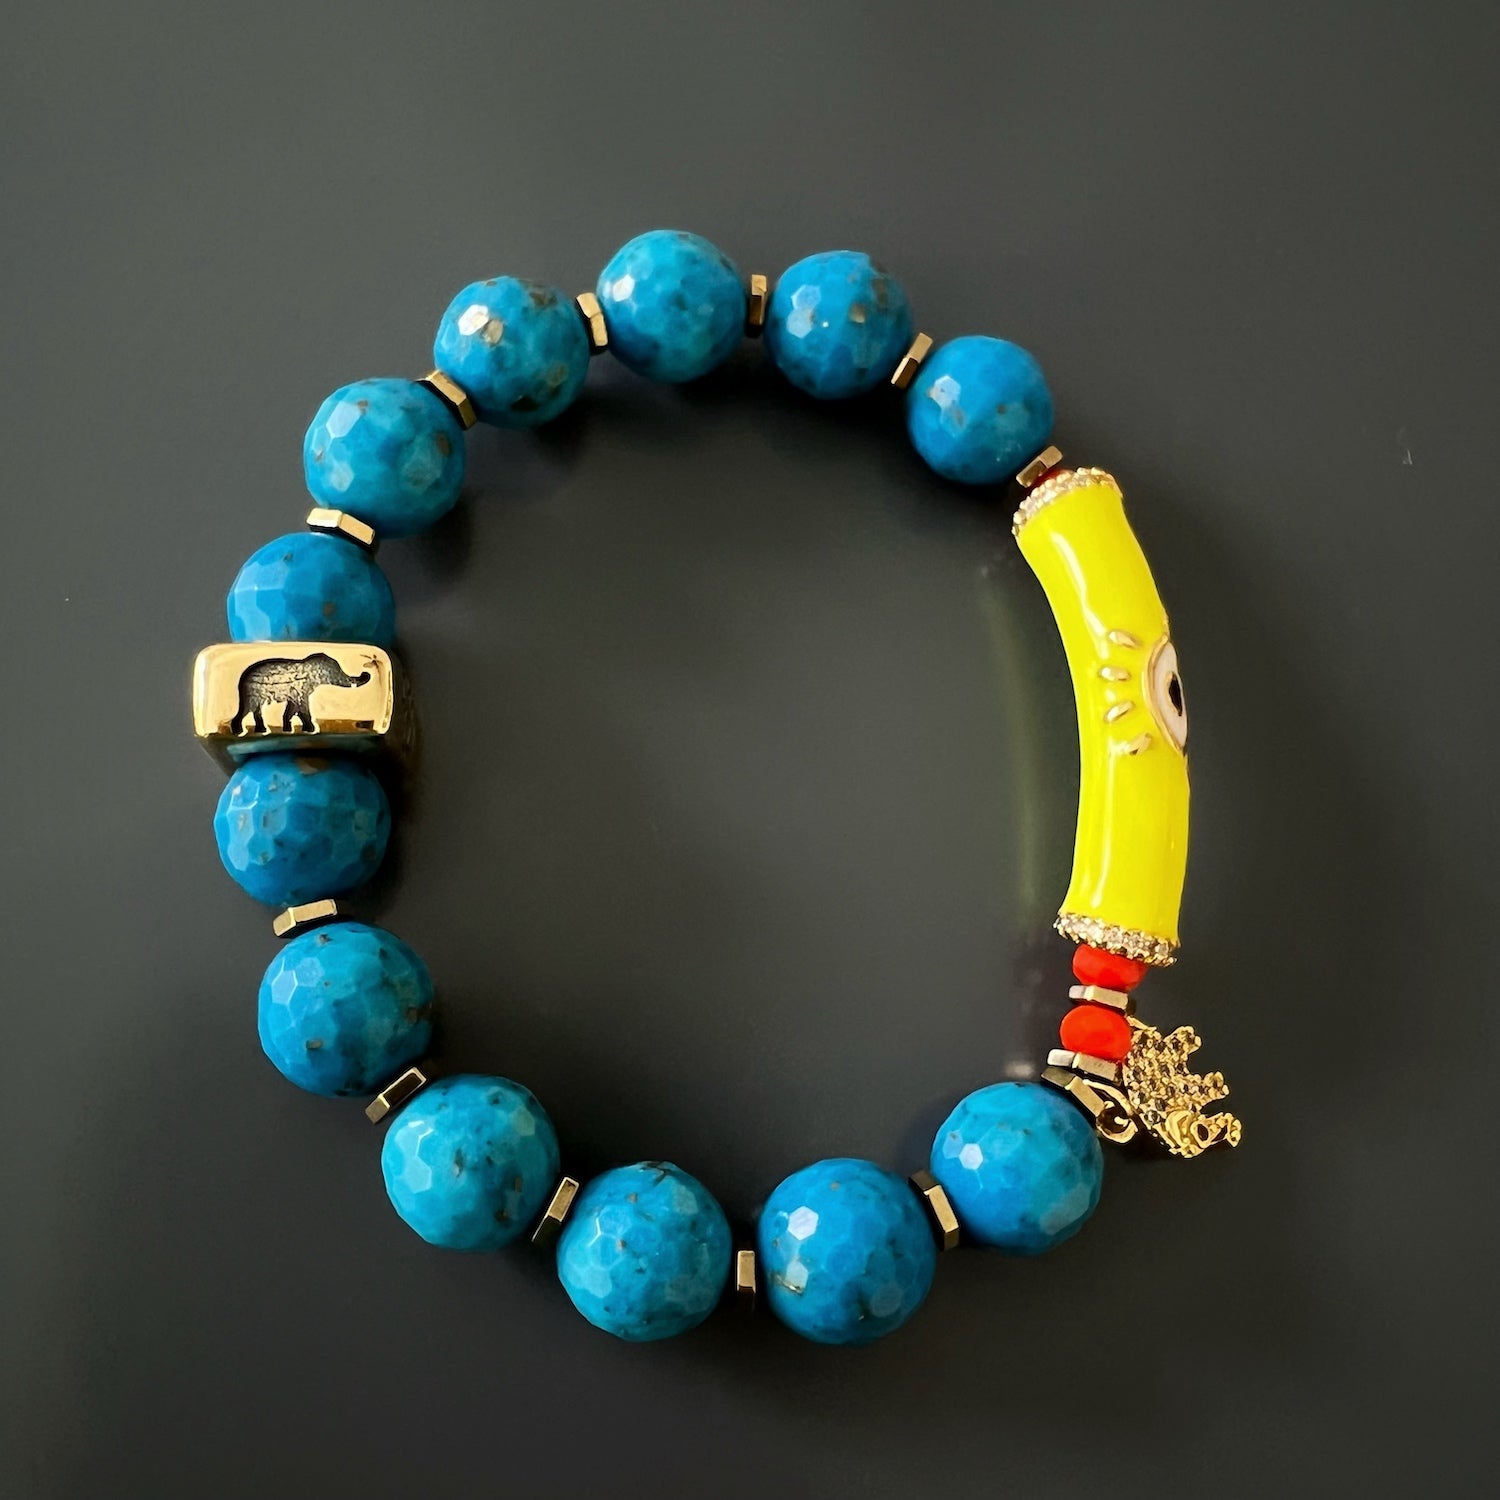 The Turquoise Unique Protection Bracelet combines beauty and spirituality, making it a truly special accessory.